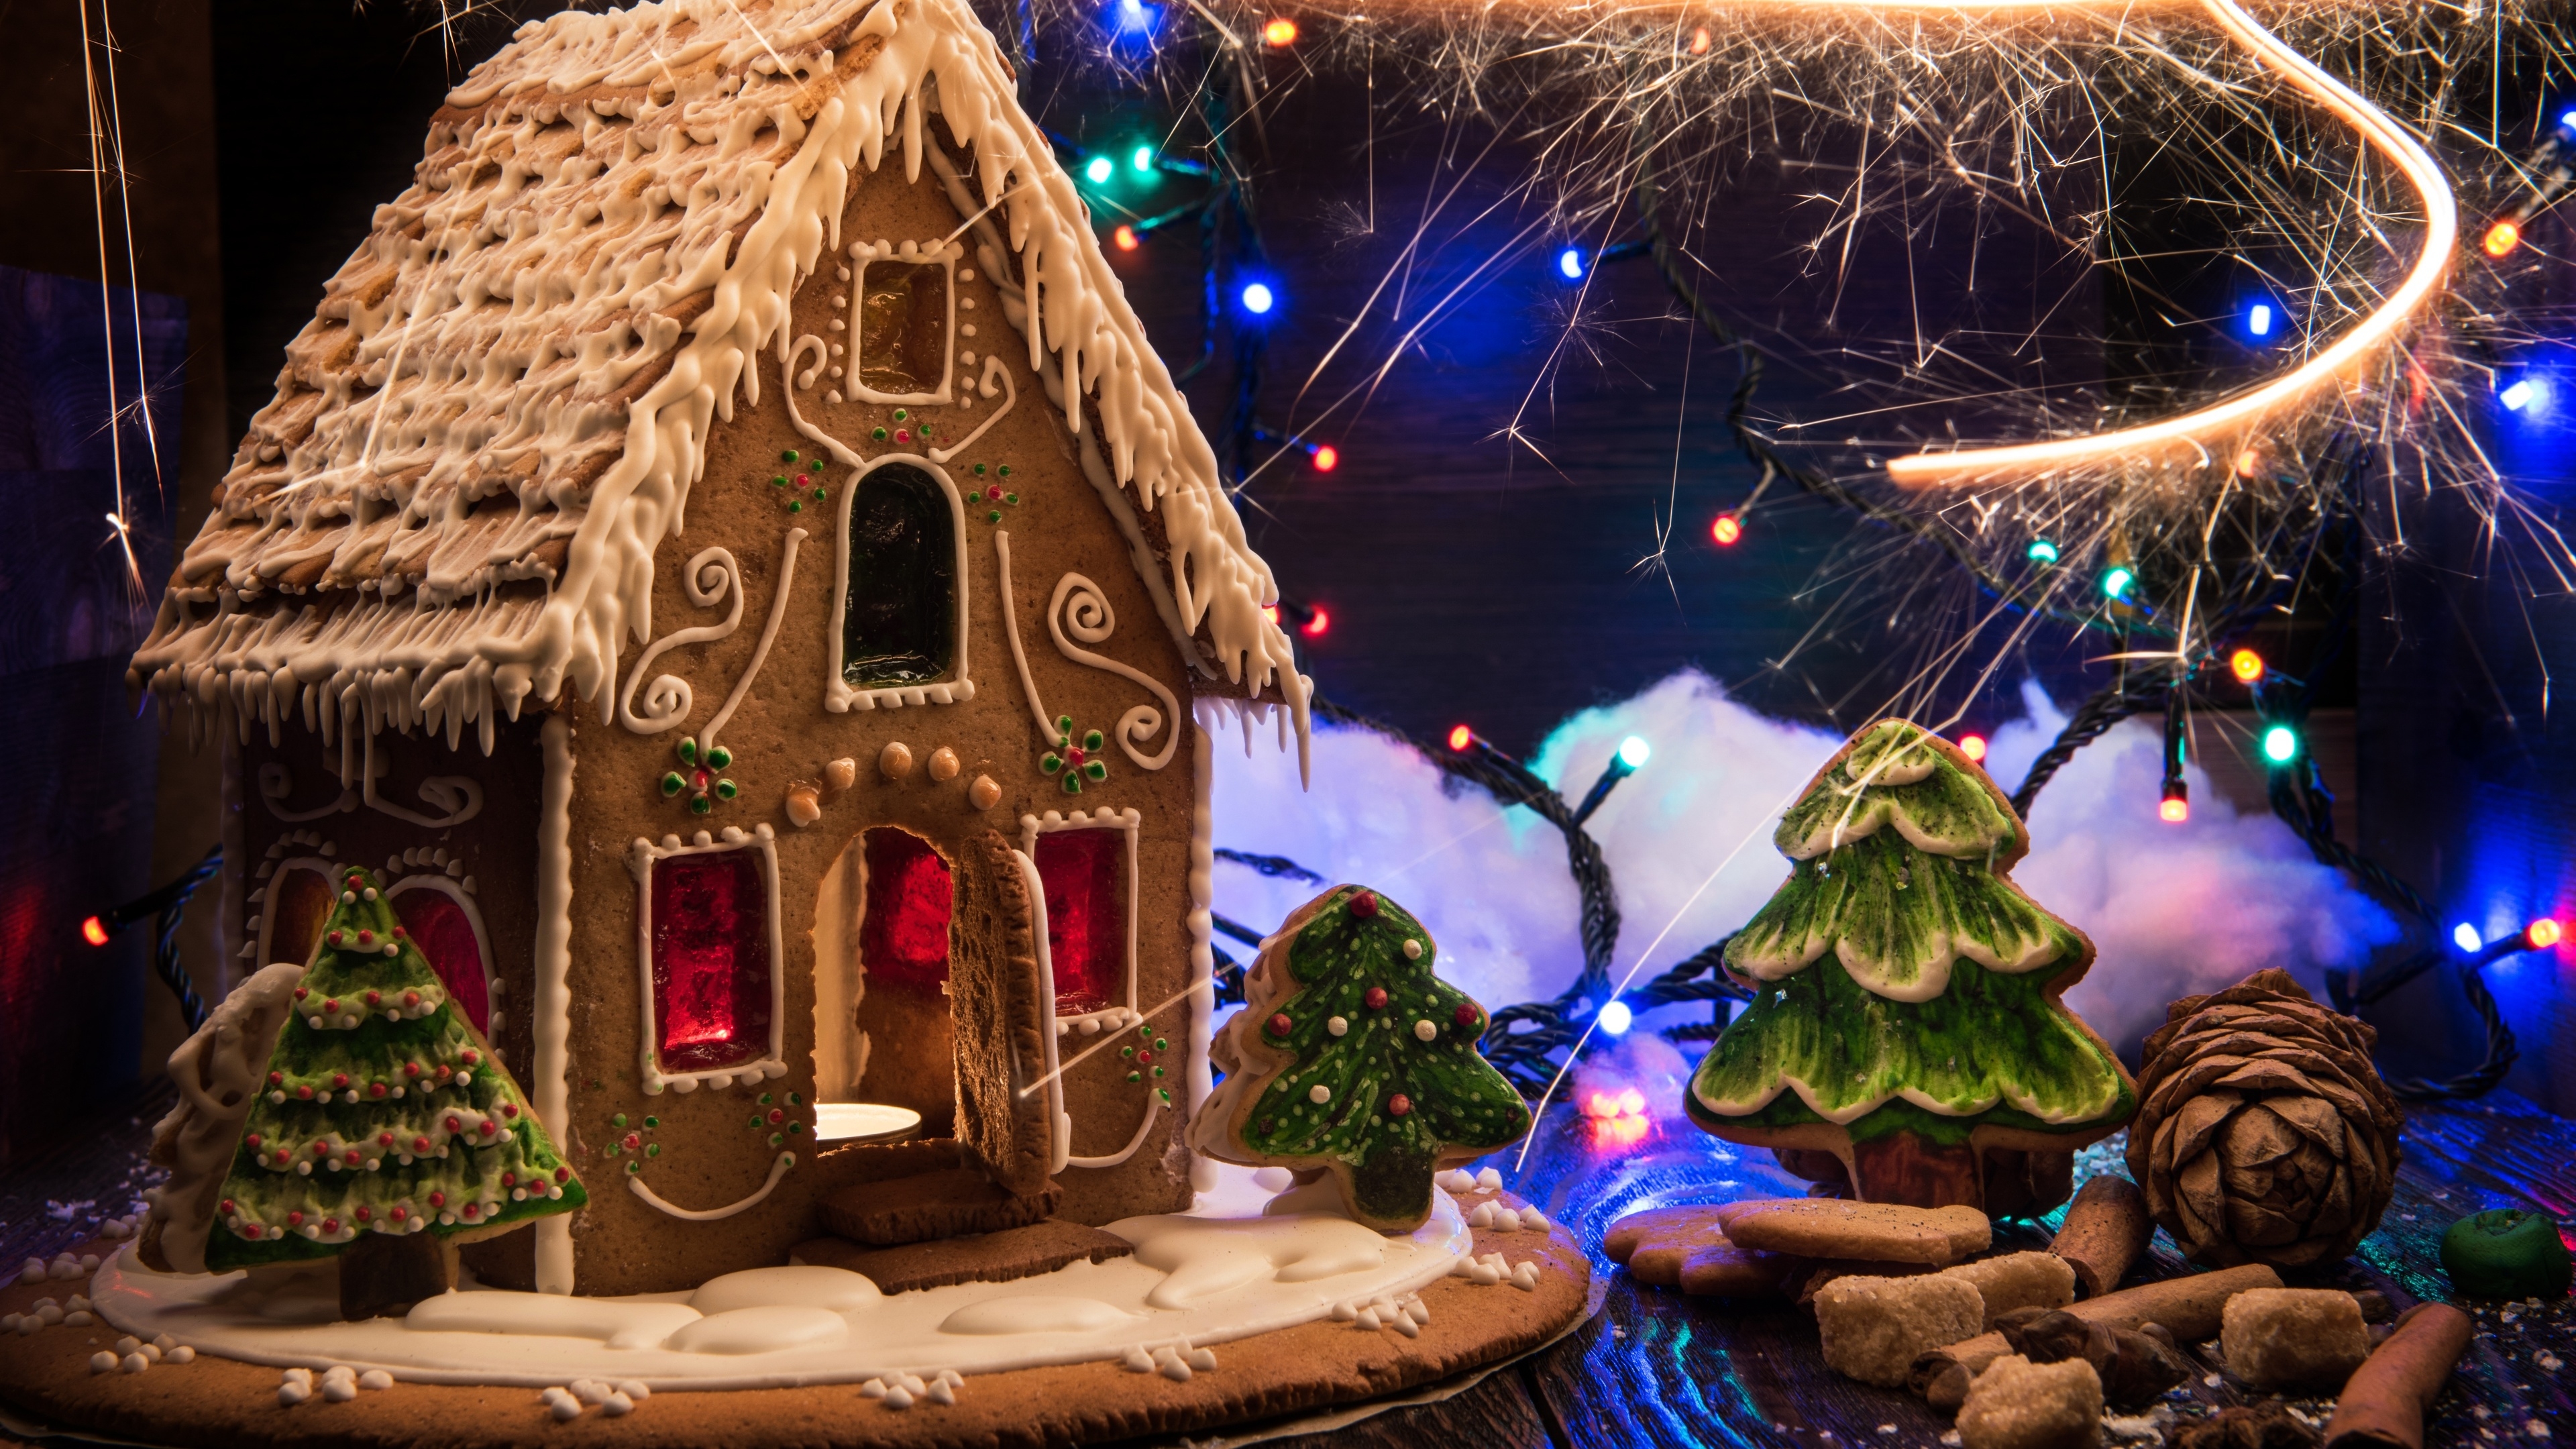 Christmas Gingerbread Decorations for 3840 x 2160 Ultra HD resolution